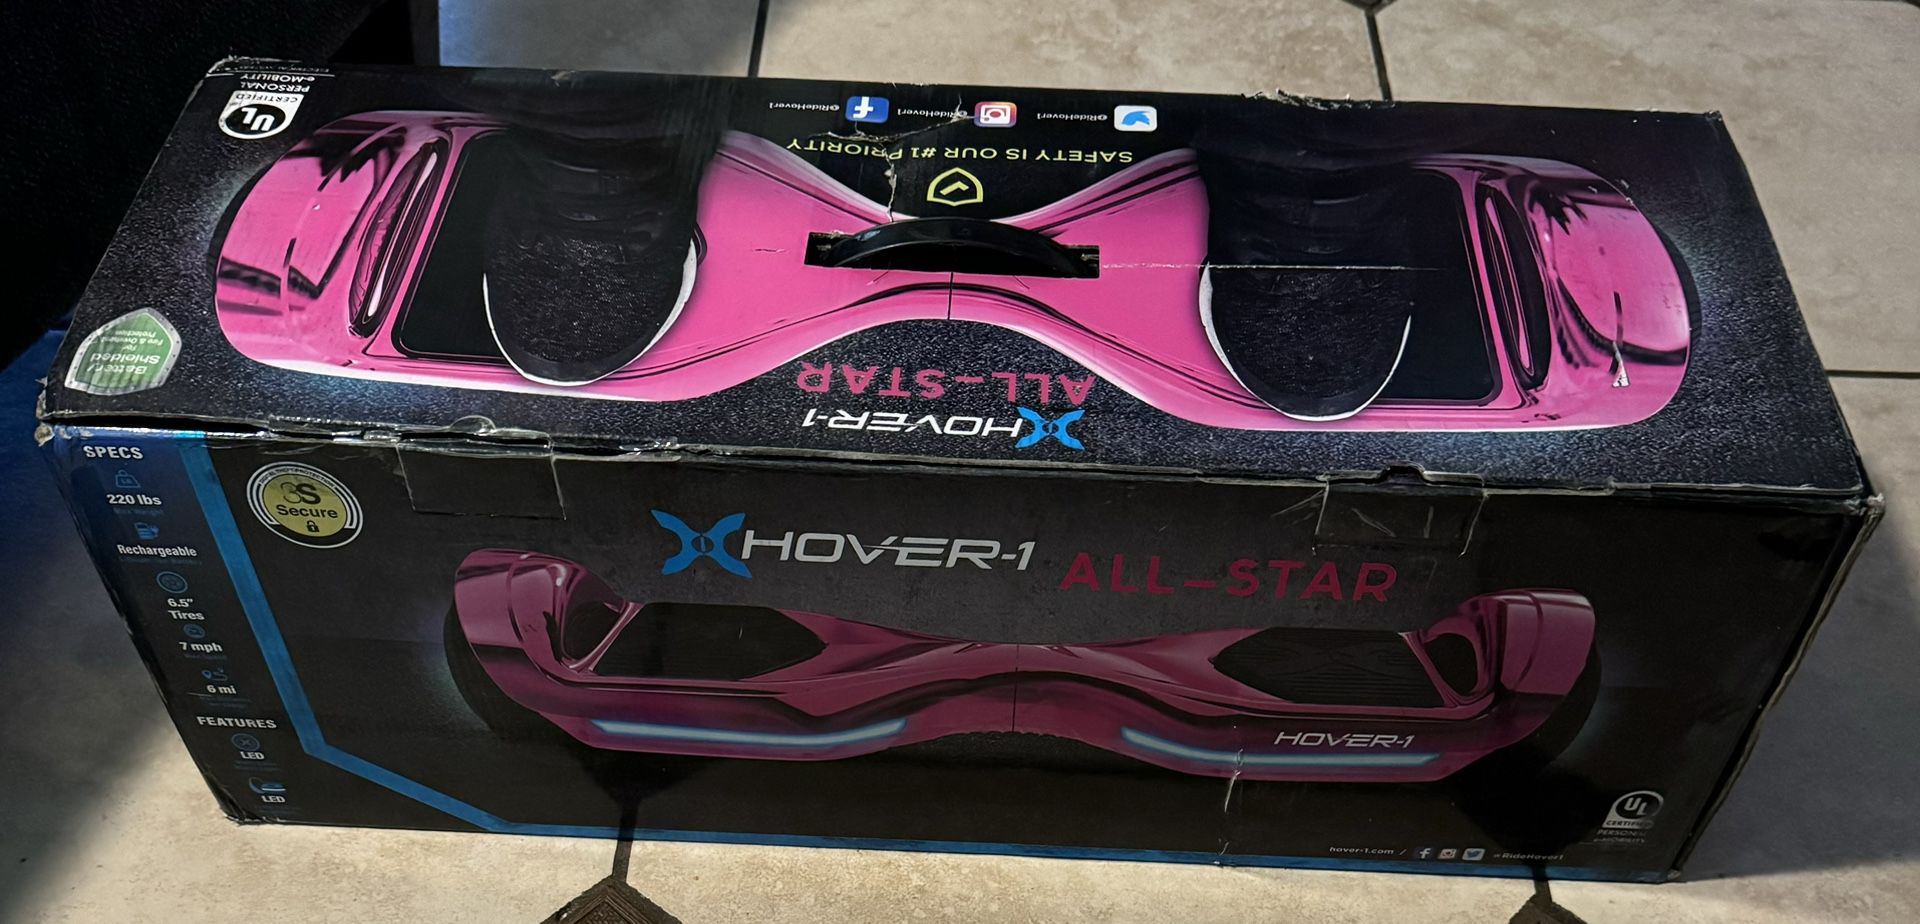 New Hover-1 All- Star Hoverboard